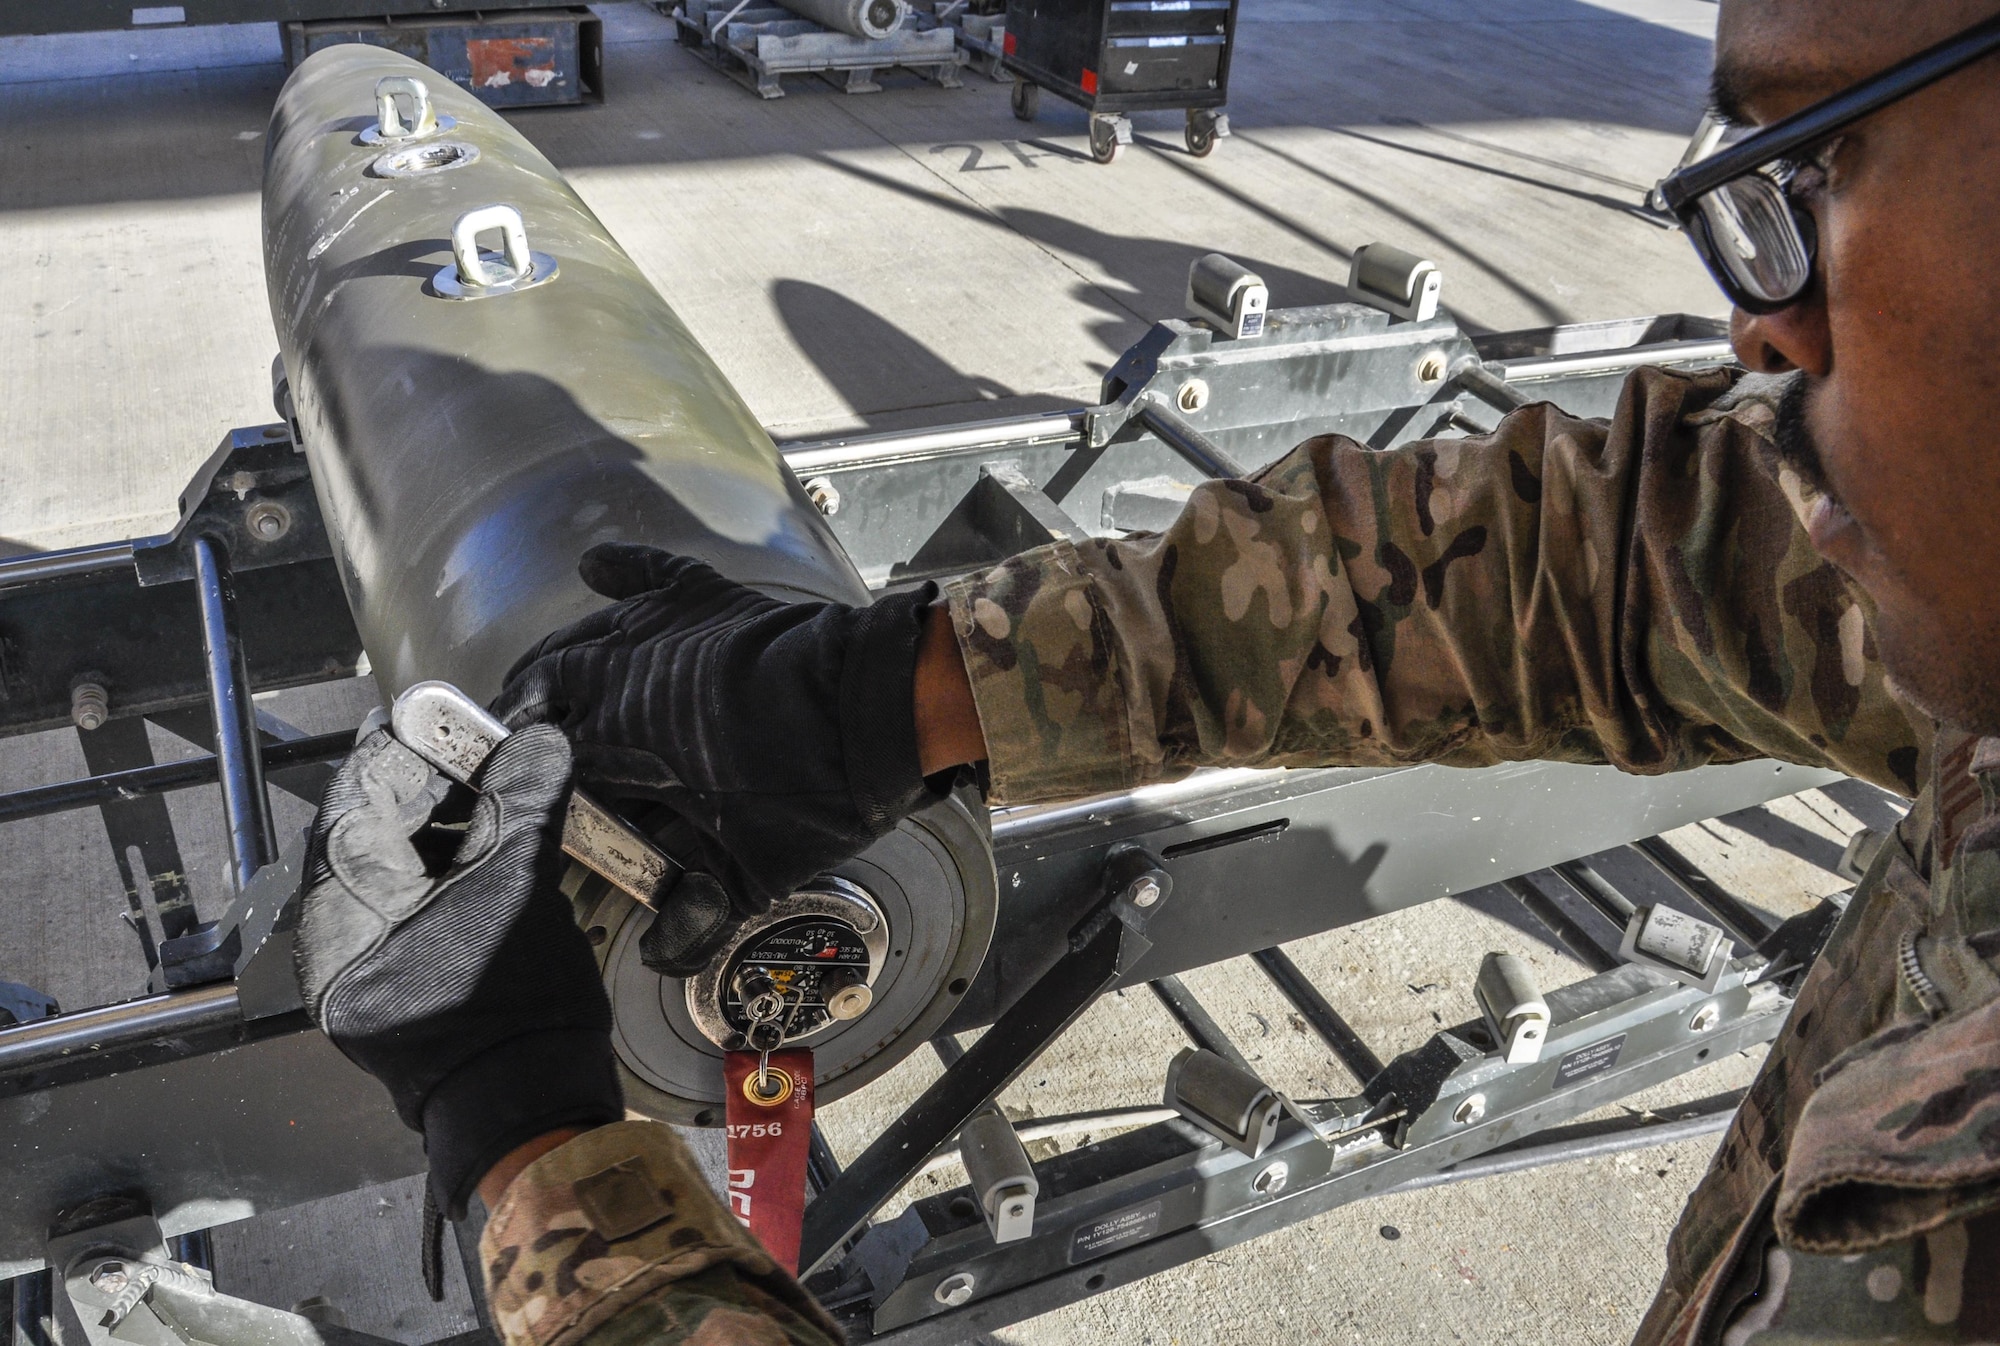 Airman 1st Class Deshawn Hill, 455th Expeditionary Maintenance Squadron munitions flight journeyman, deployed from Hill Air Force Base, Utah, tightens a fuze while building GBU-54 500 pound bomb at Bagram Airfield, Afghanistan, Nov. 17, 2015. The AMMO flight provides necessary weapons and countermeasures required to project combat airpower. (U.S. Air Force photo by Tech. Sgt. Nicholas Rau/Released)